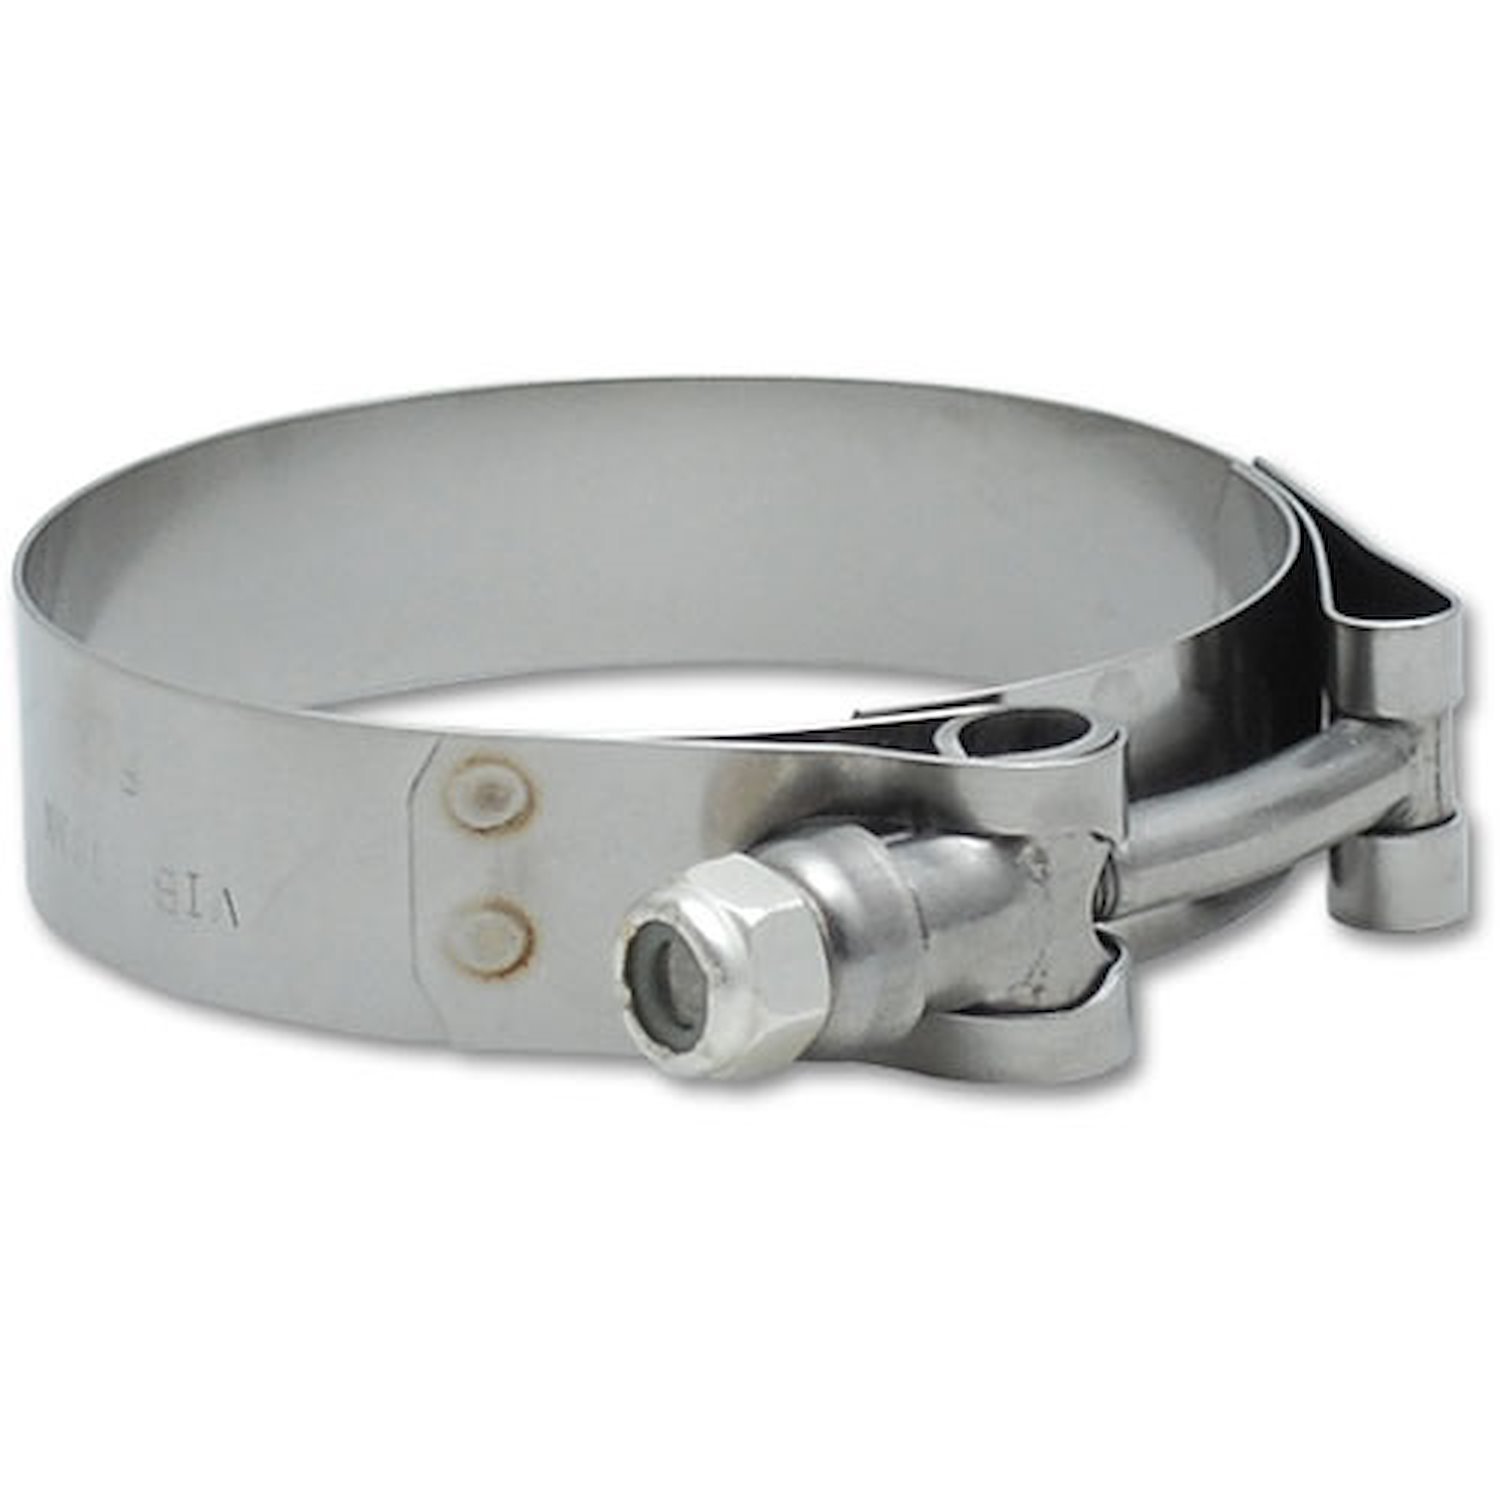 Stainless Steel T-Bolt Clamps Clamp Range 1.30" - 1.50"